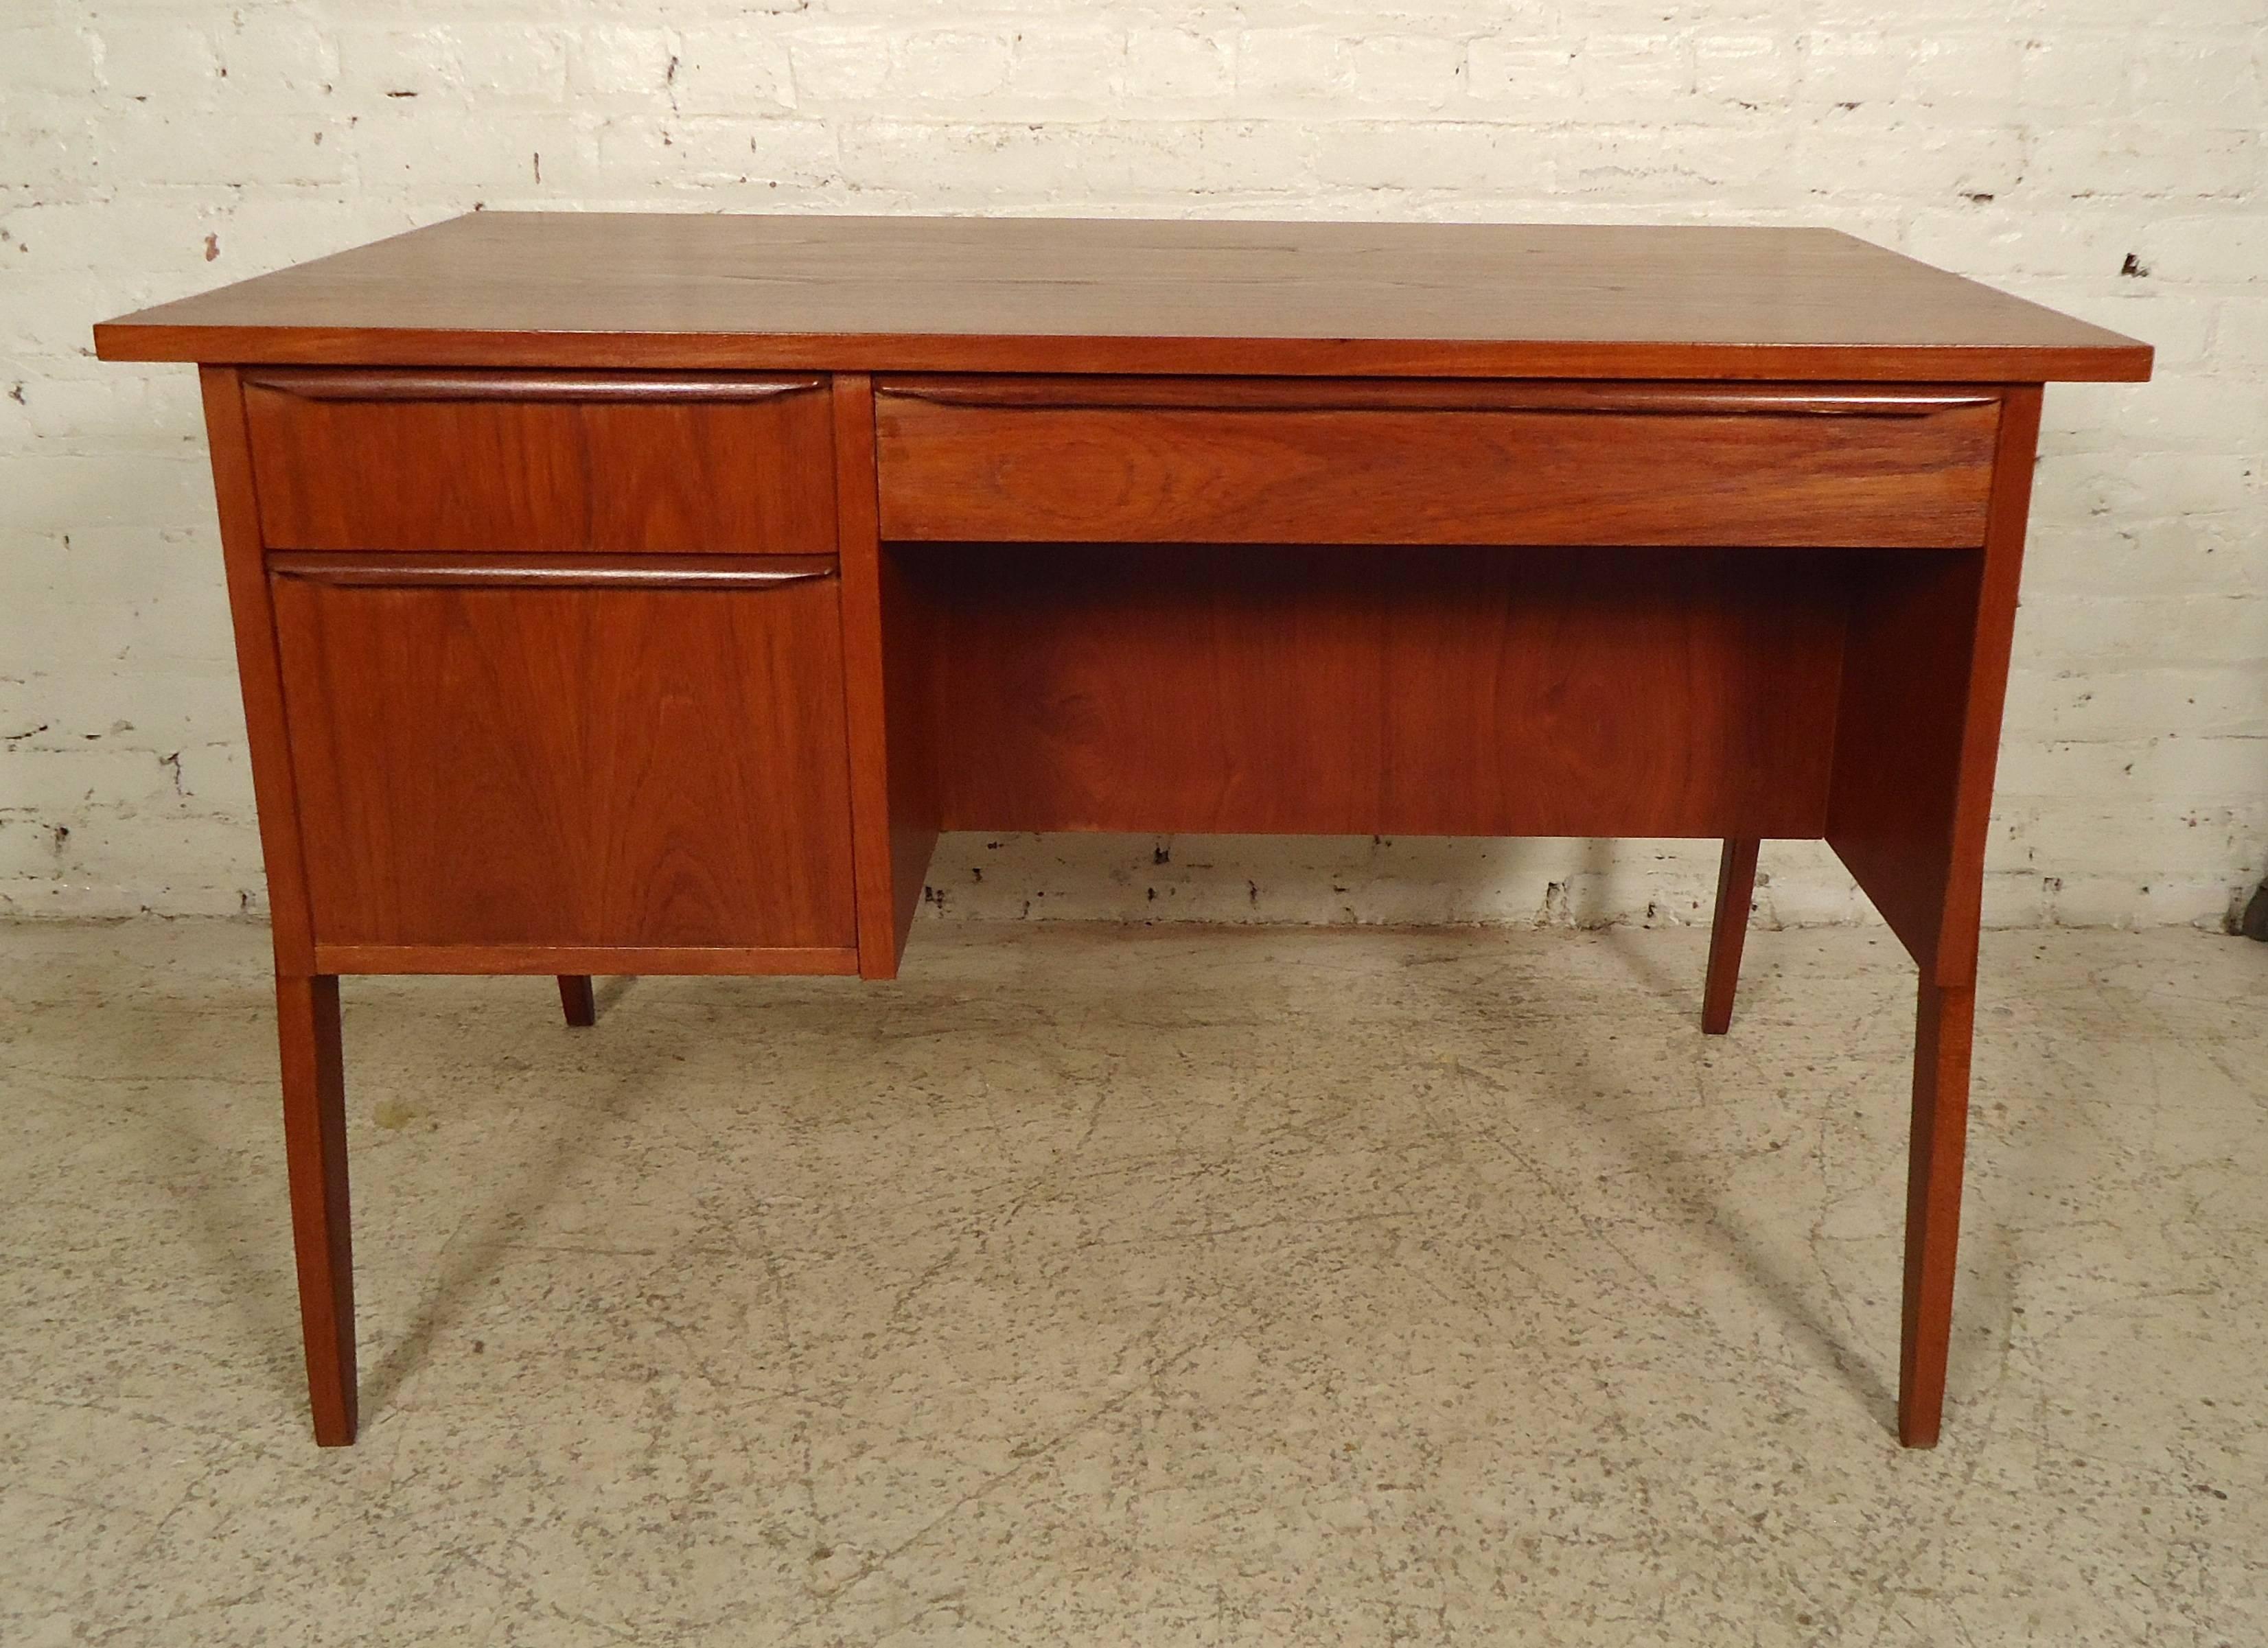 This unique vintage-modern desk comes with many features, such as a pull-out vanity mirror, front drawer, and storage unit. The back also has a set of drawers with hand-carved handles; the table rests on splayed legs.

(Please confirm item